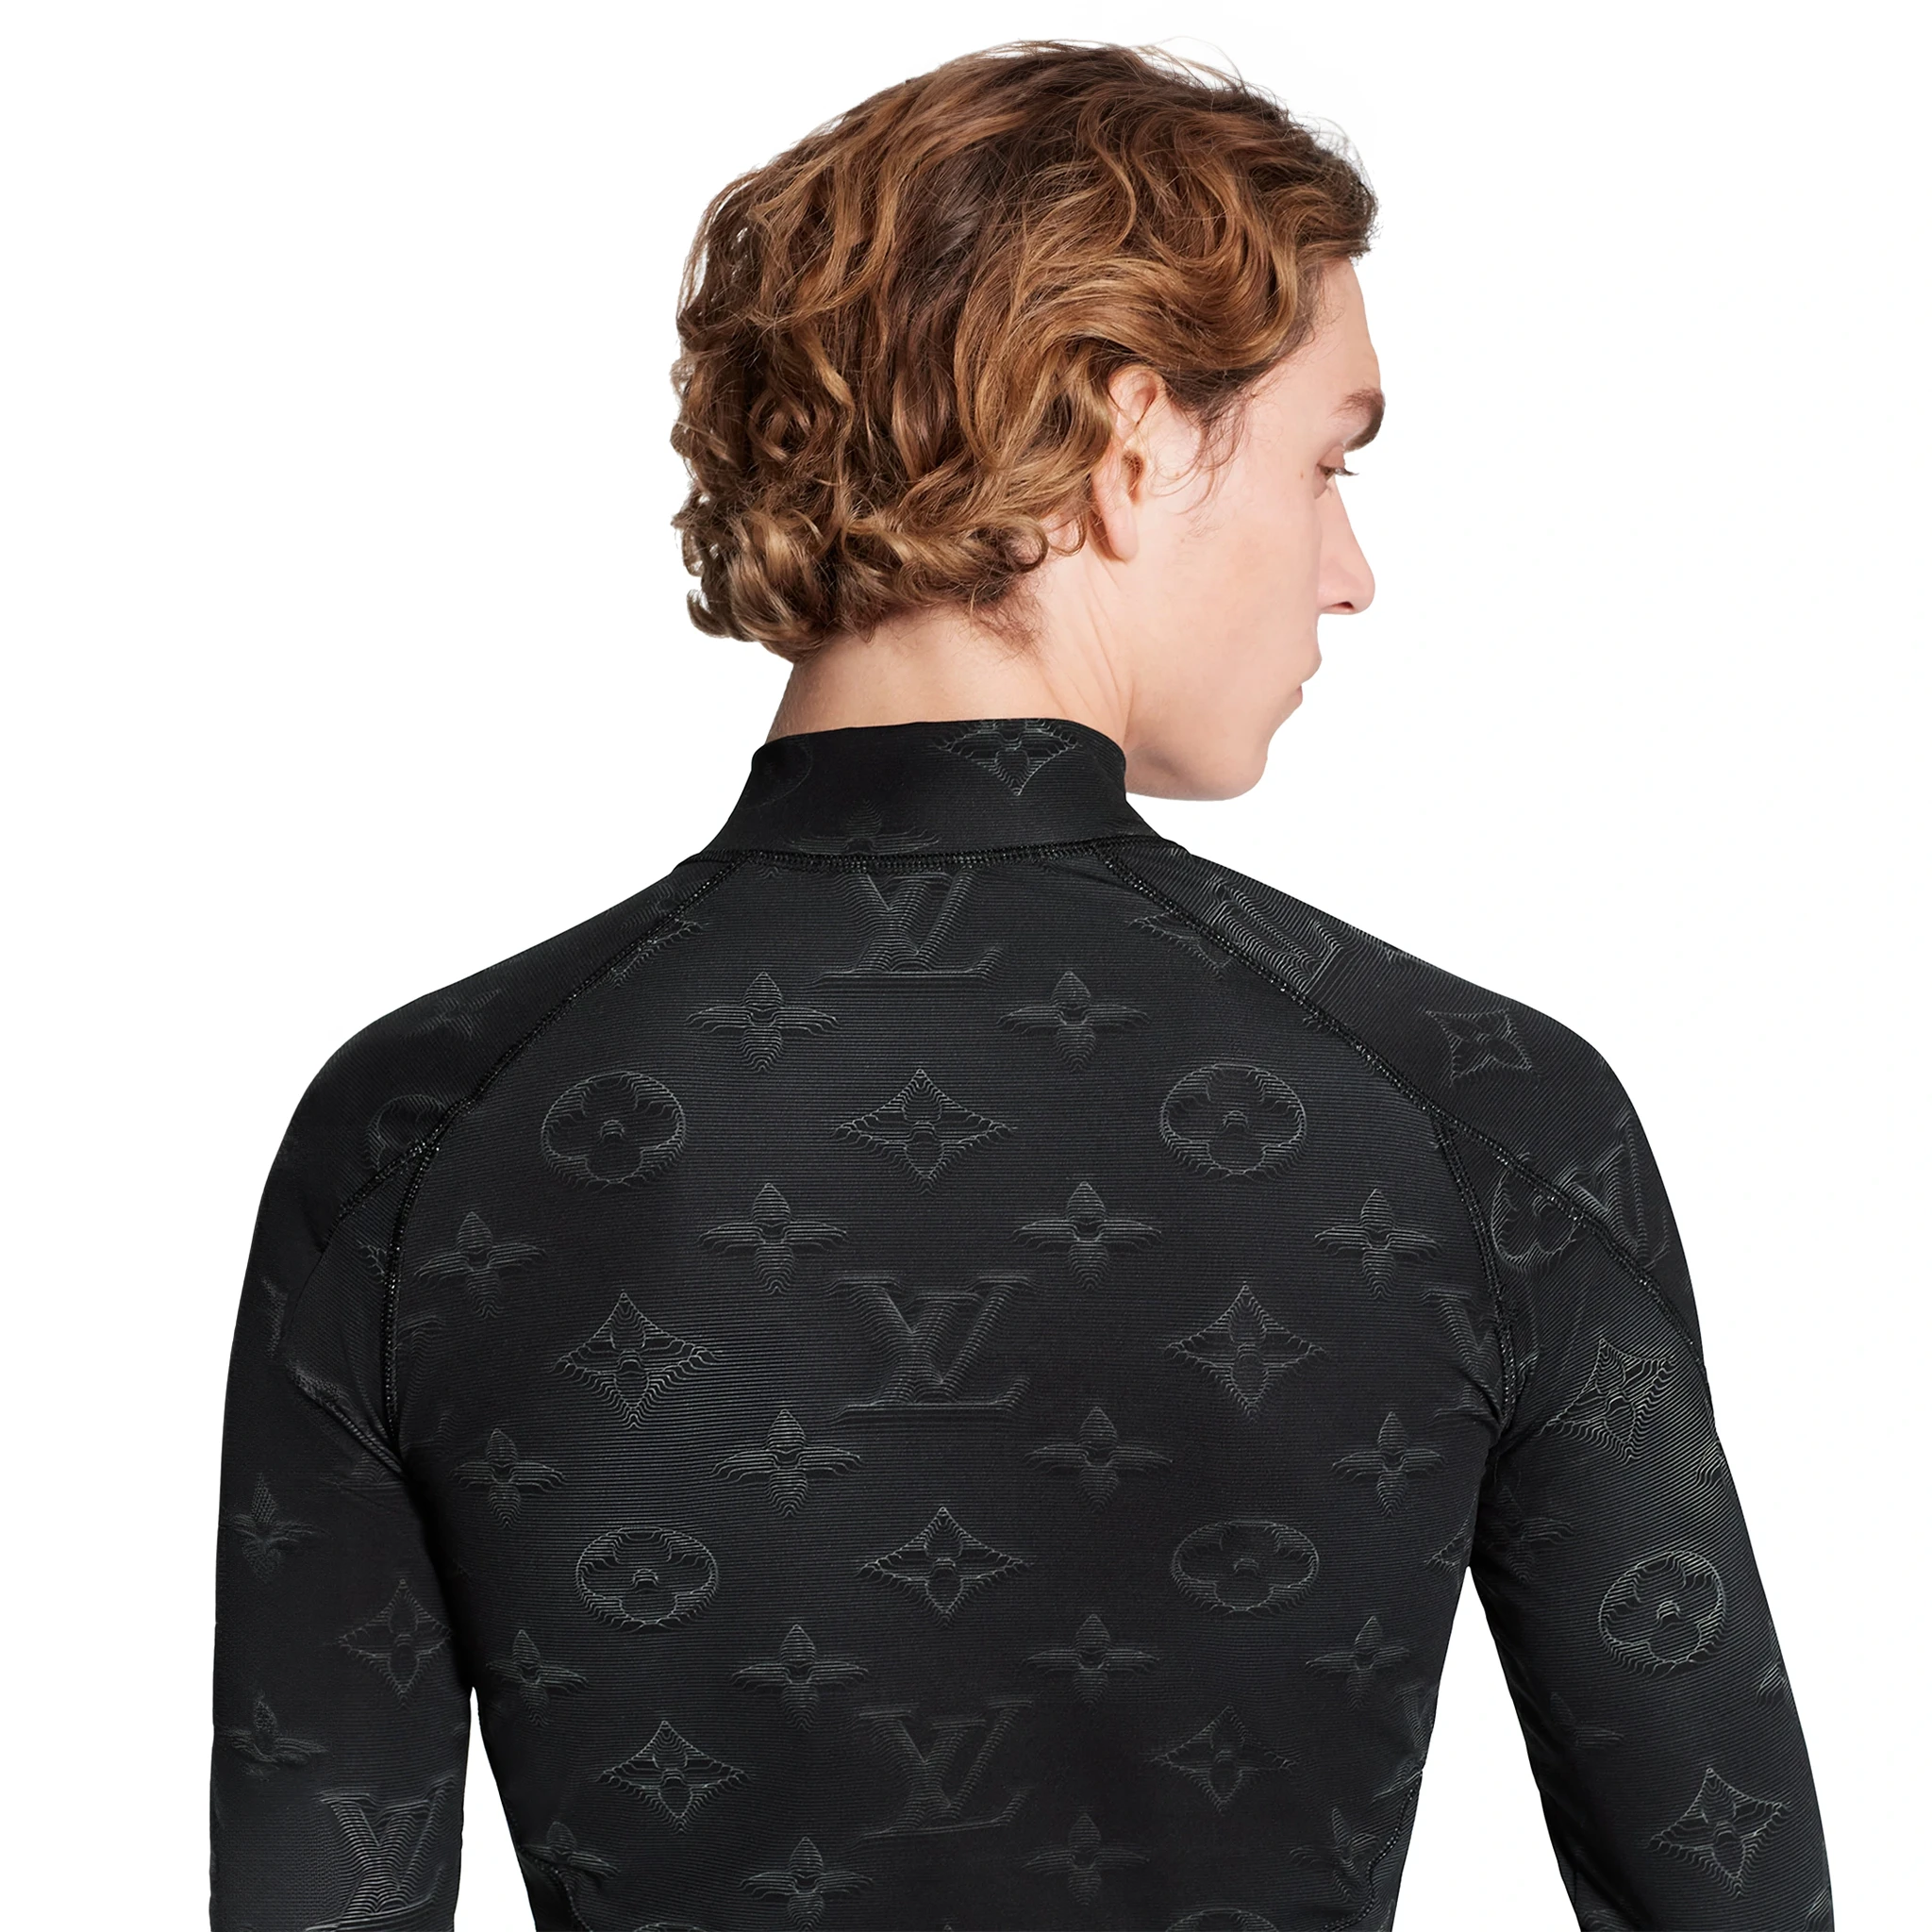 Back view of Louis Vuitton 2054 Technical Half Zip Long-Sleeved Top